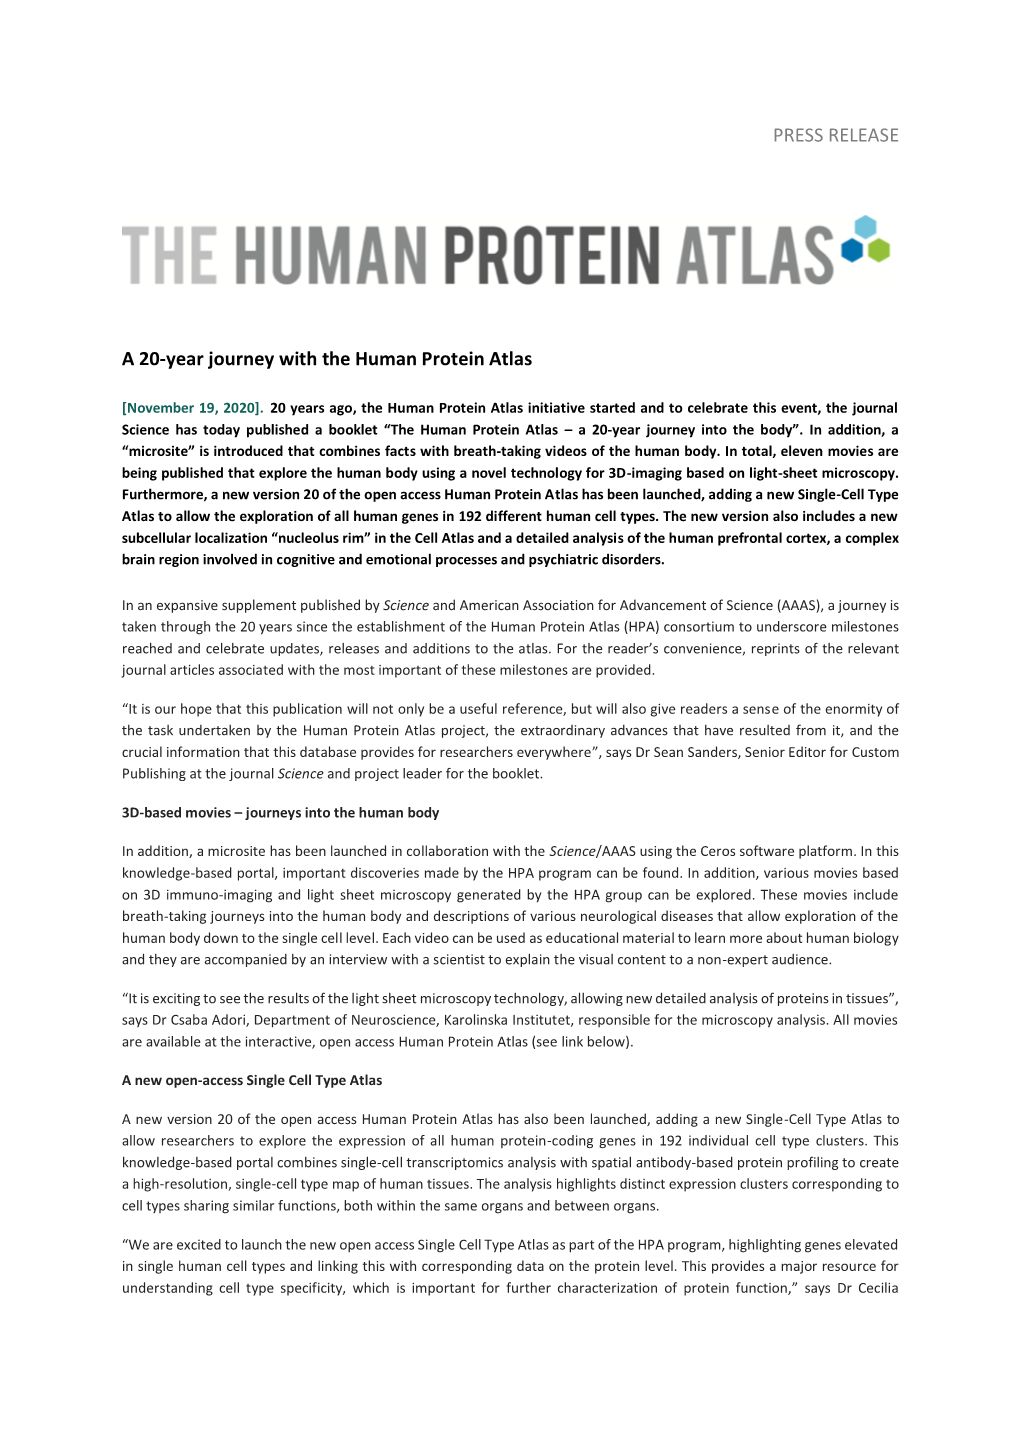 PRESS RELEASE a 20-Year Journey with the Human Protein Atlas